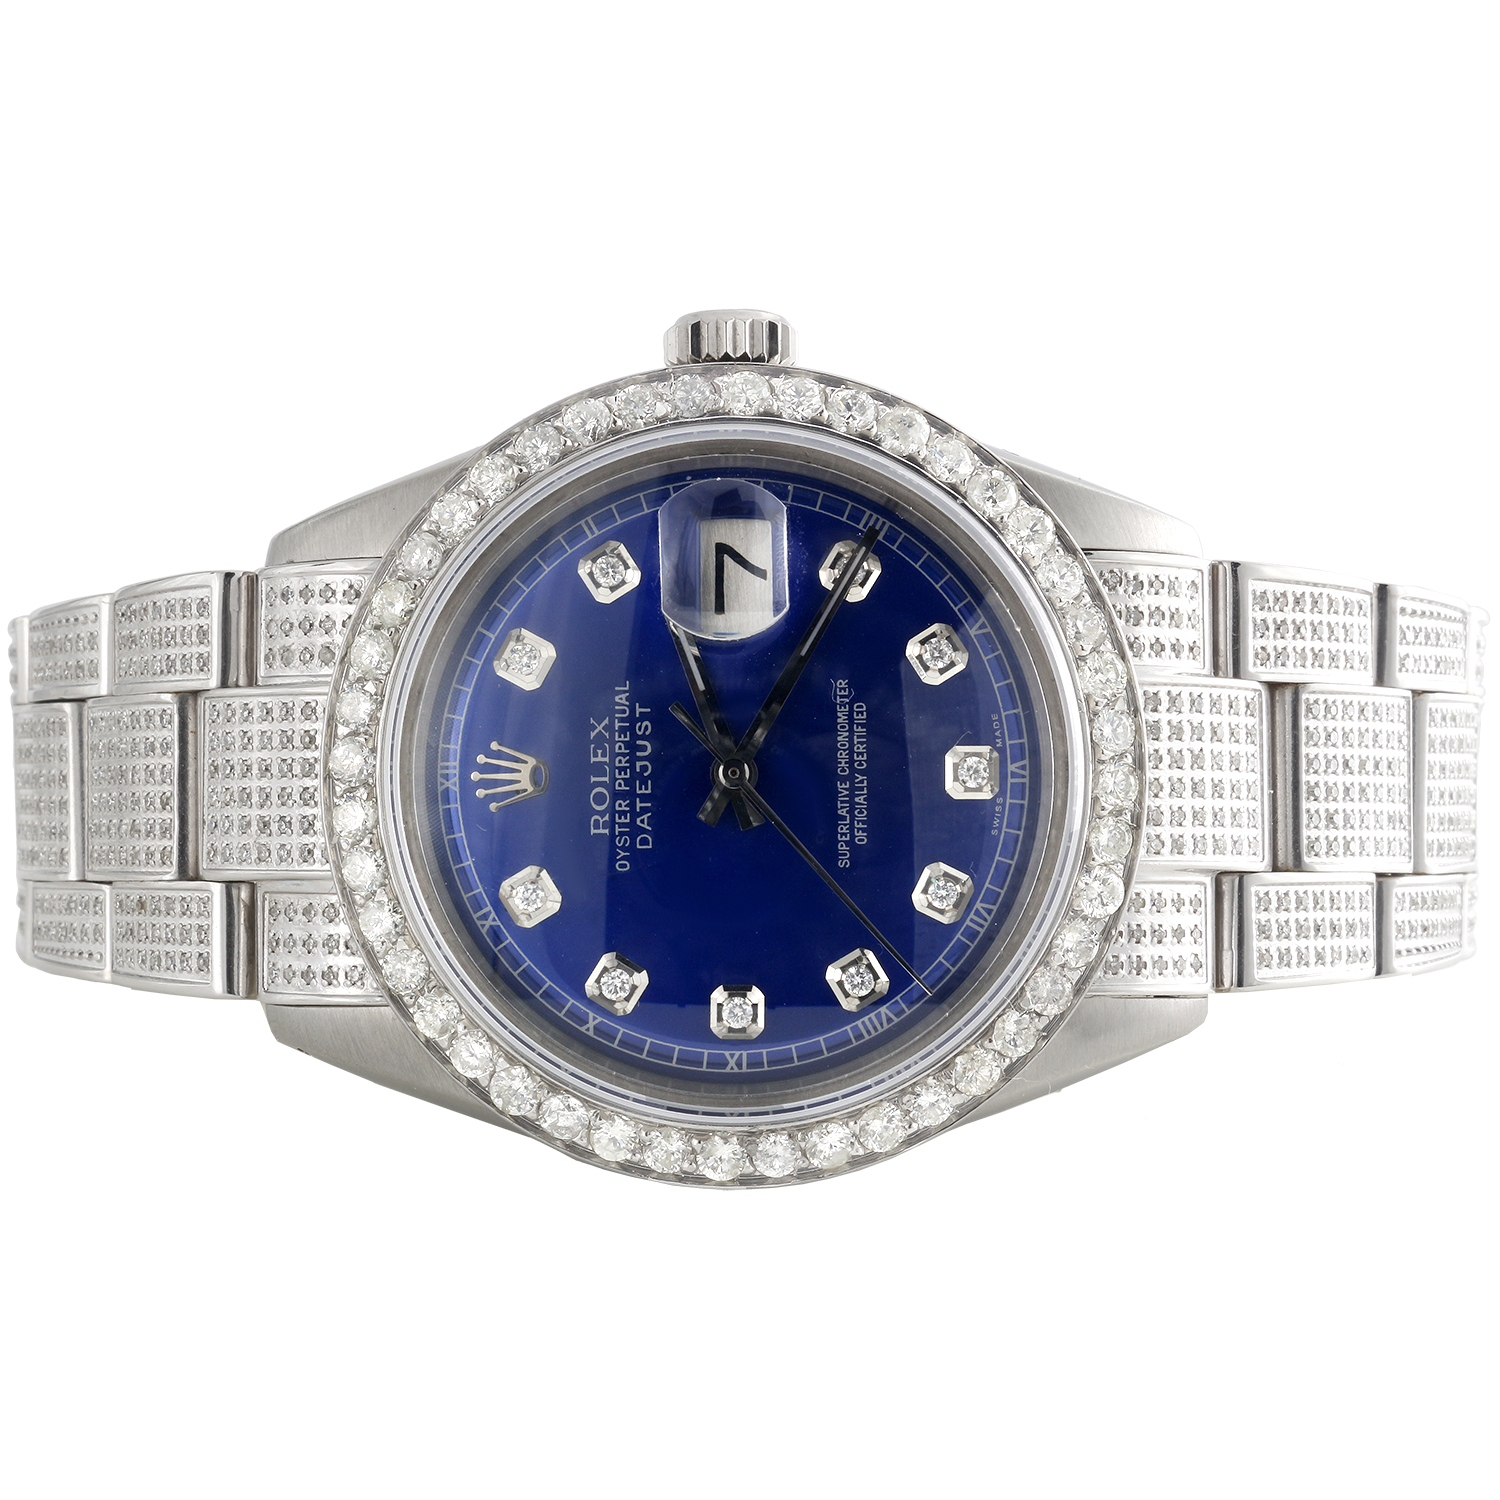 Mens Rolex 36mm DateJust Diamond Watch Fully Iced Band Custom Blue Dial 5.10 CT. - image 5 of 8